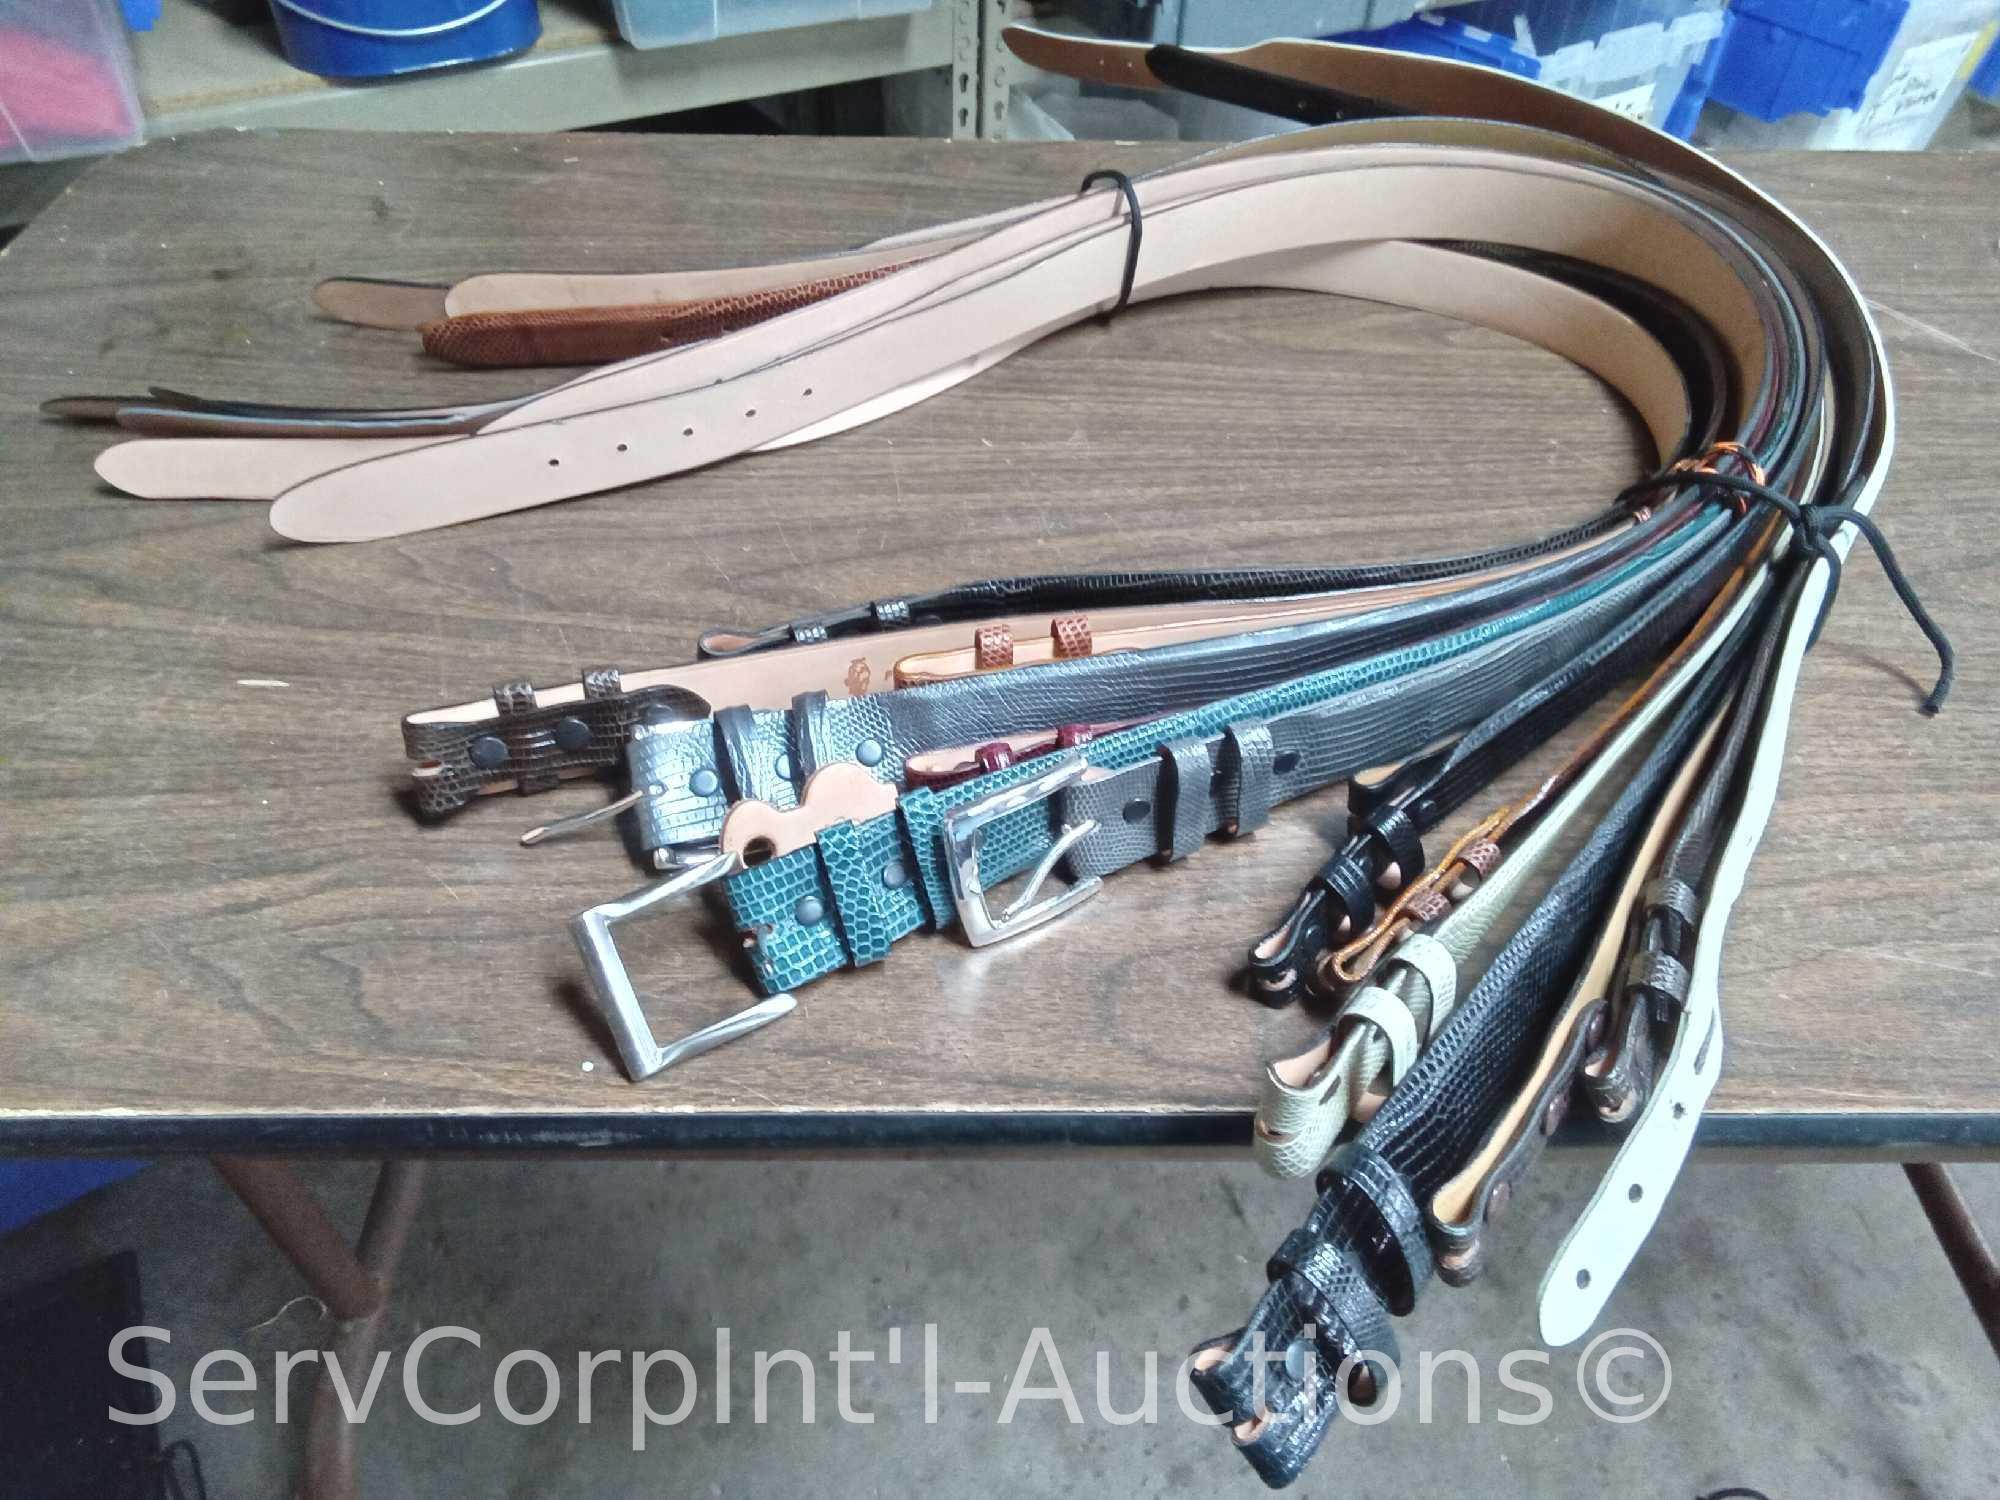 Lot on Shelf of Approximately 90 Belts & a Bag of Various Buckles: Buffalo, Calf, Saddle Leather,